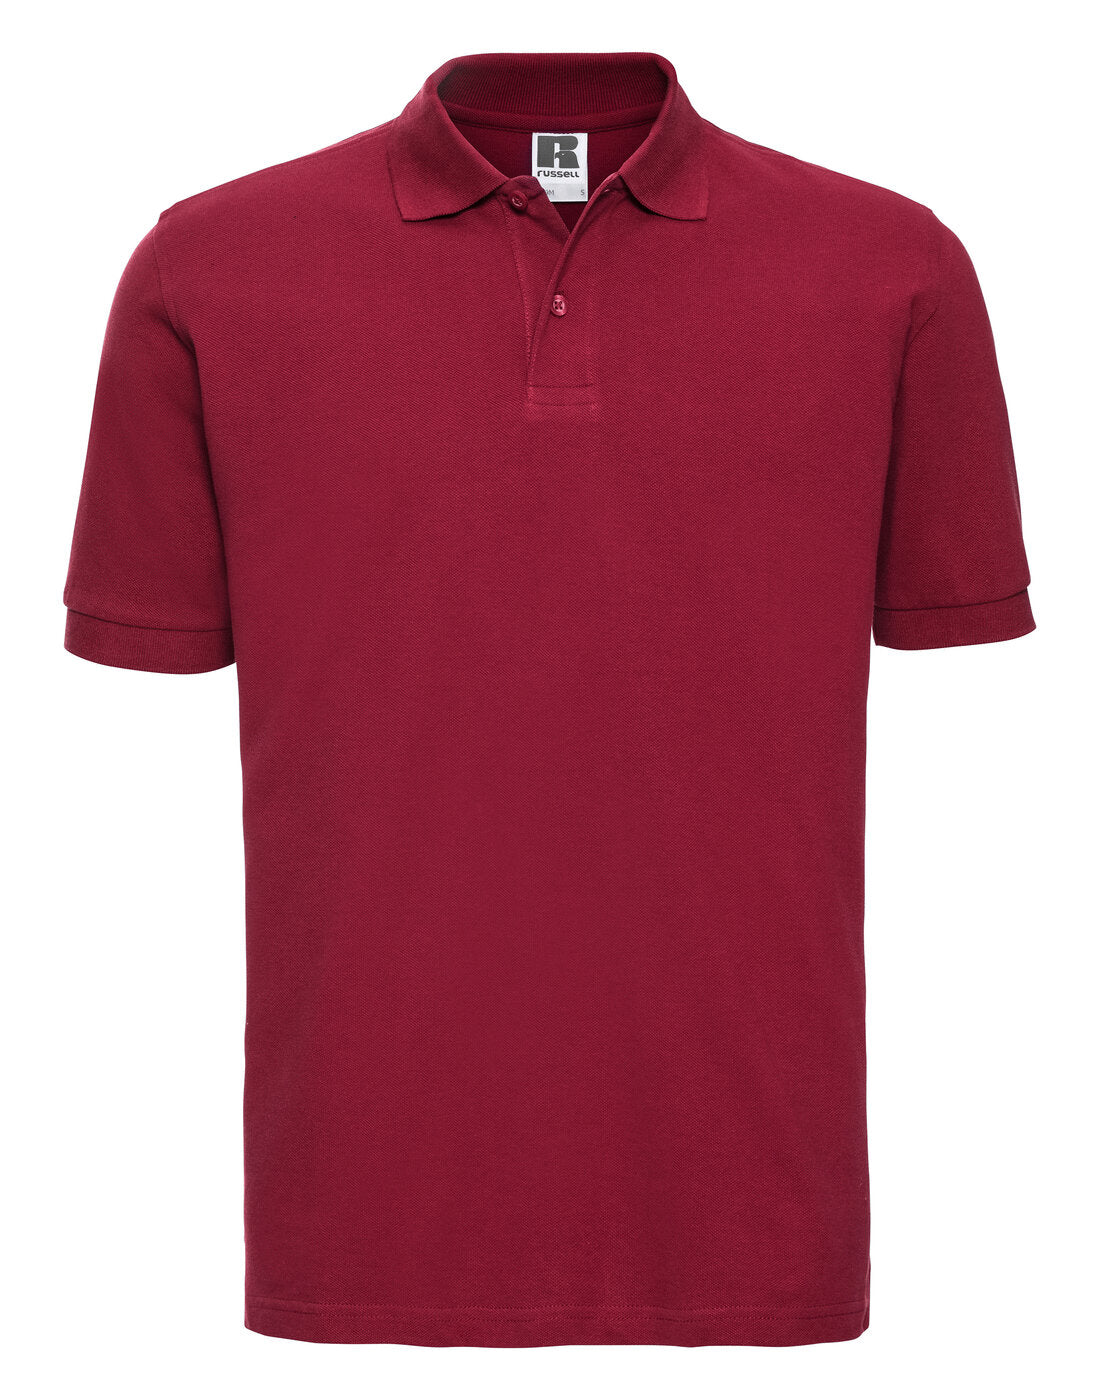 Russell Classic Cotton Polo - 569M Classic Red